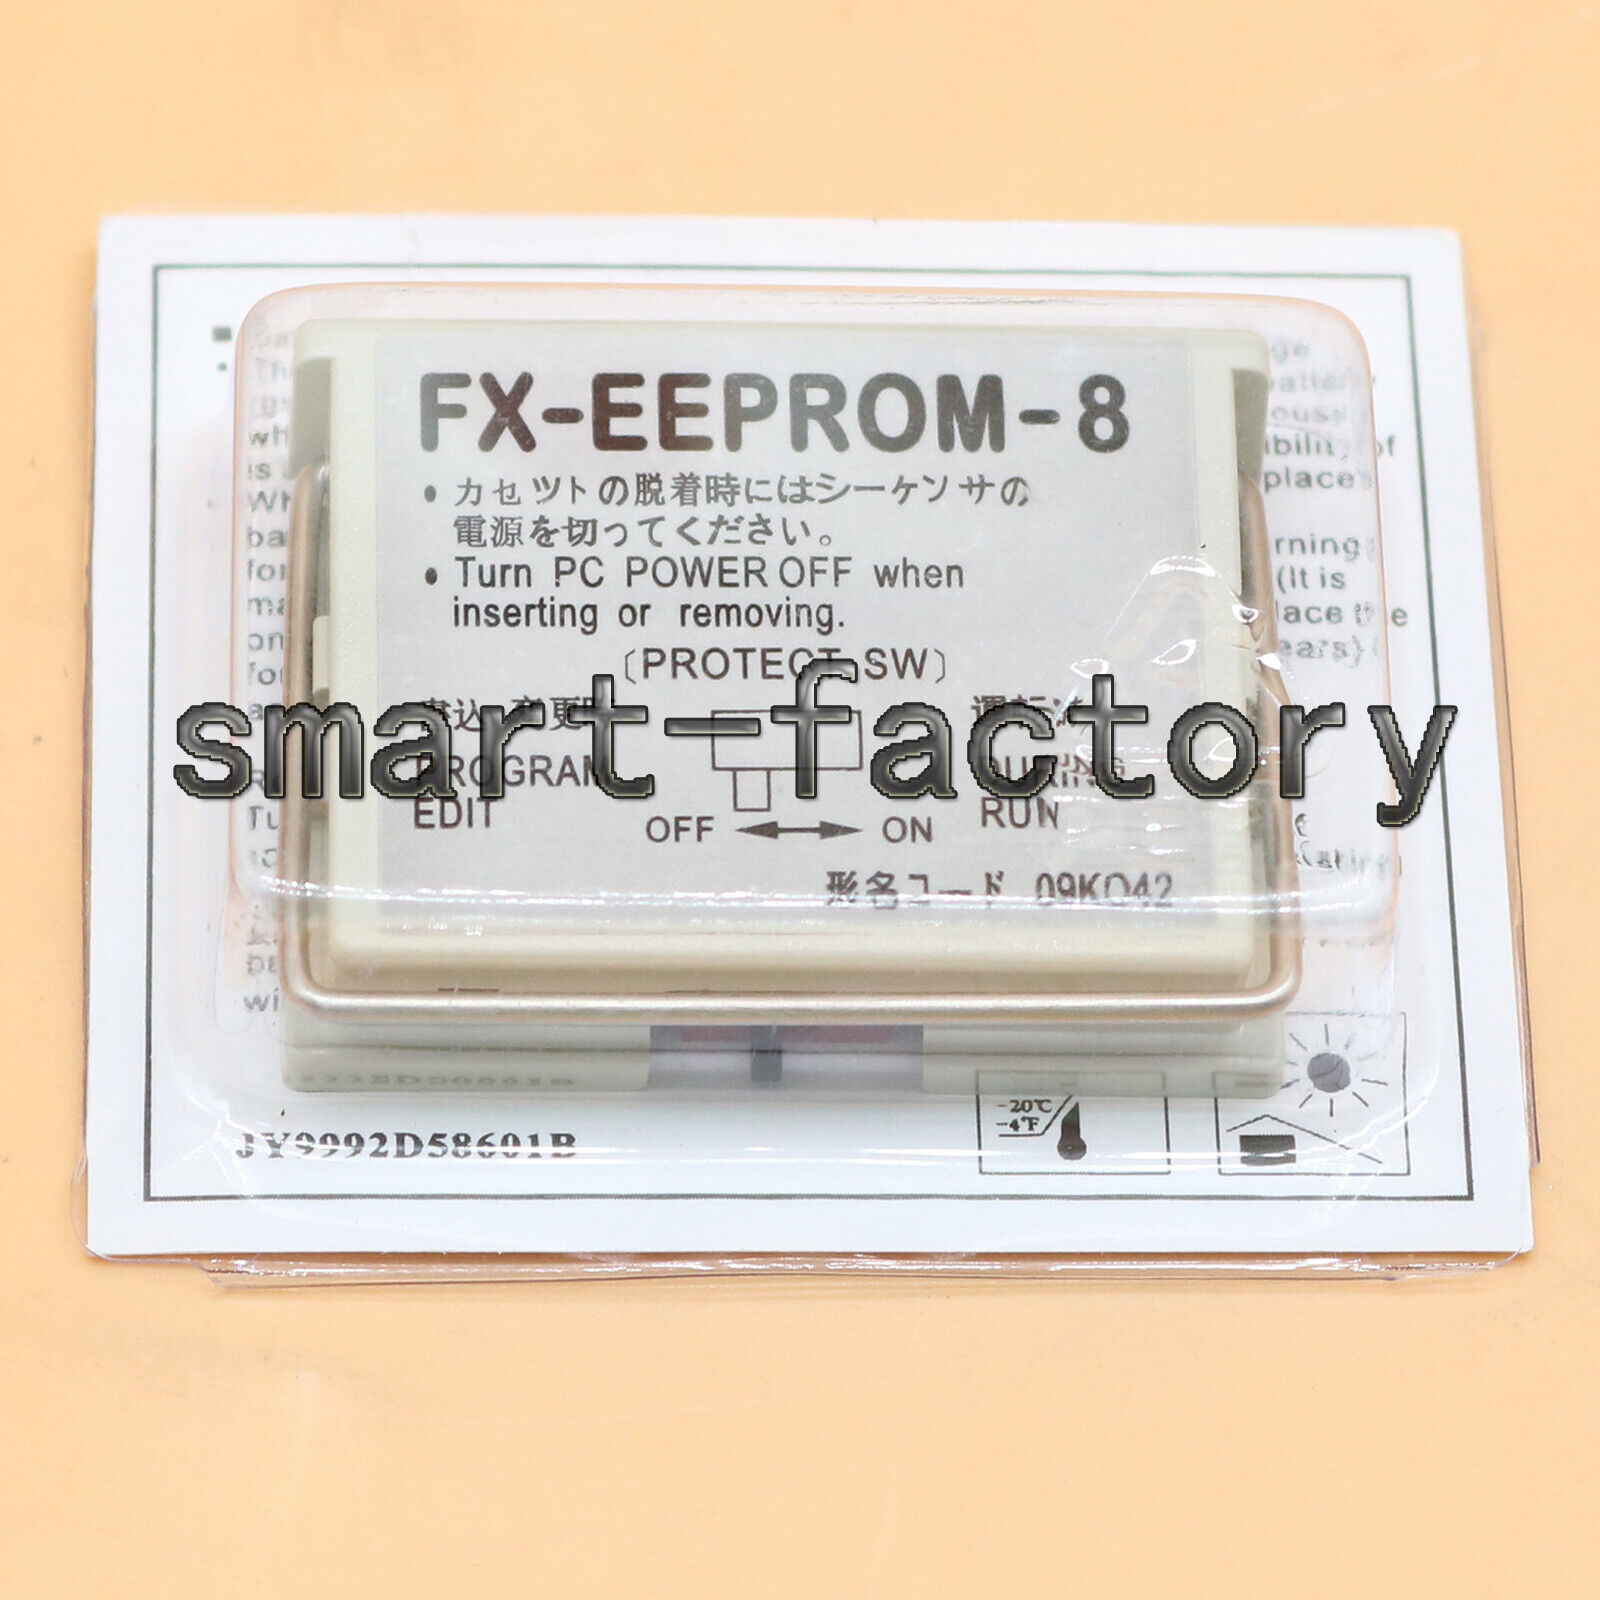 1ps new Mitsubishi In Box FX-EEPROM-8 Memory Card FXEEPROM8 One year warranty